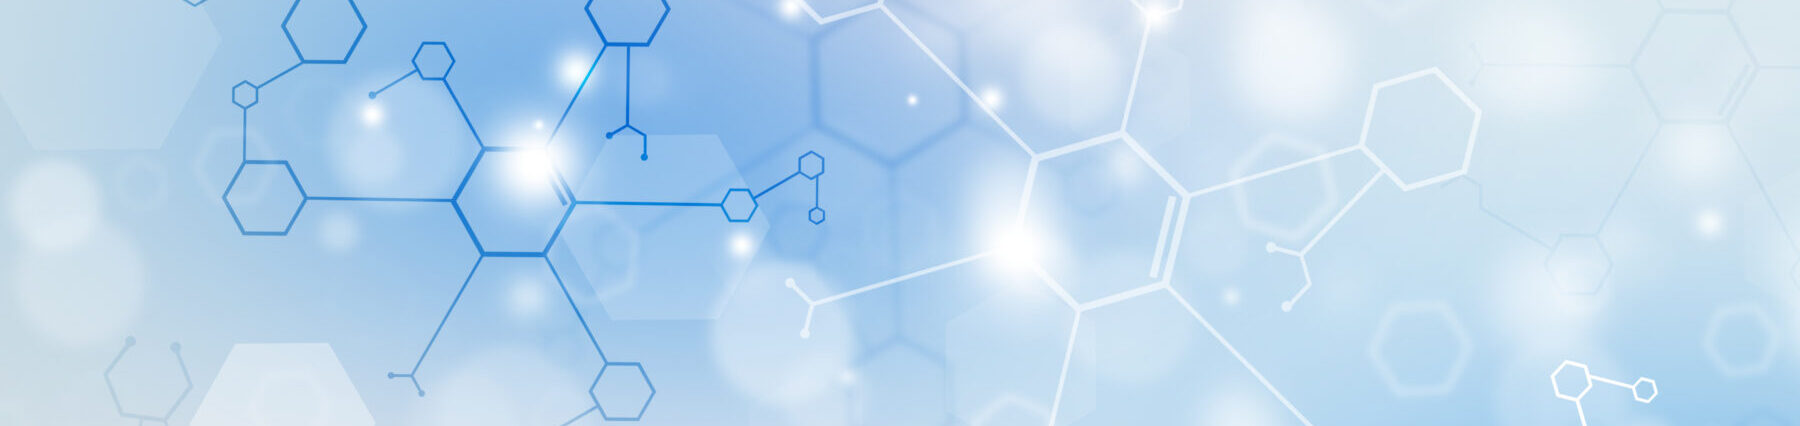 abstract science and medicine blue banner with chemistry elements